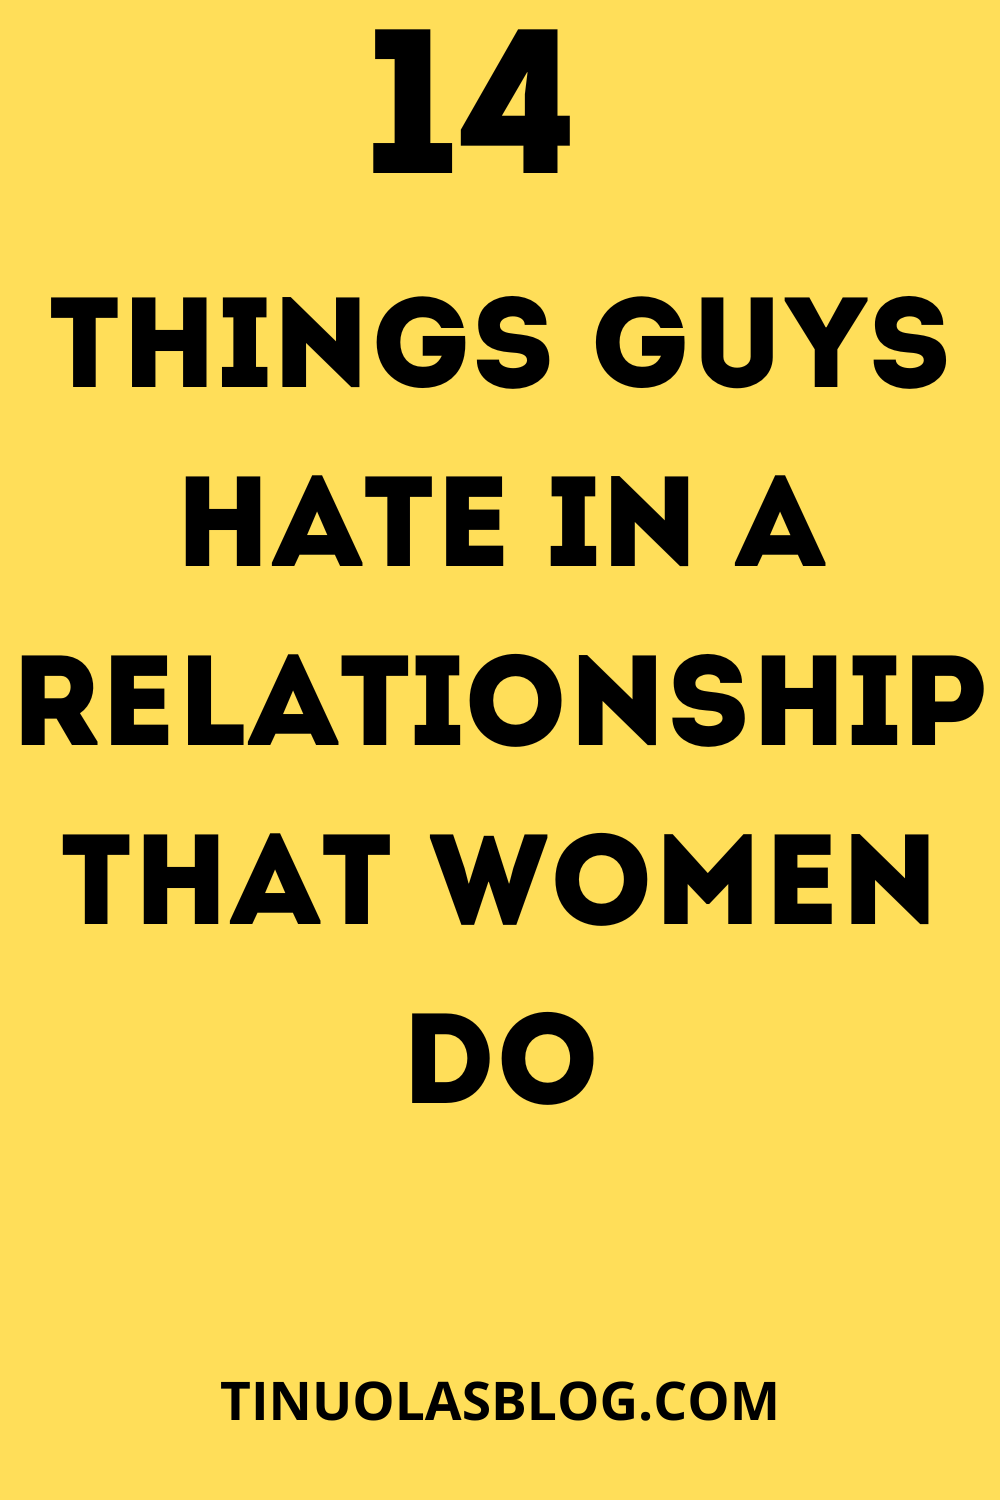 14 Things Guys Hate In A Relationship That Women Do